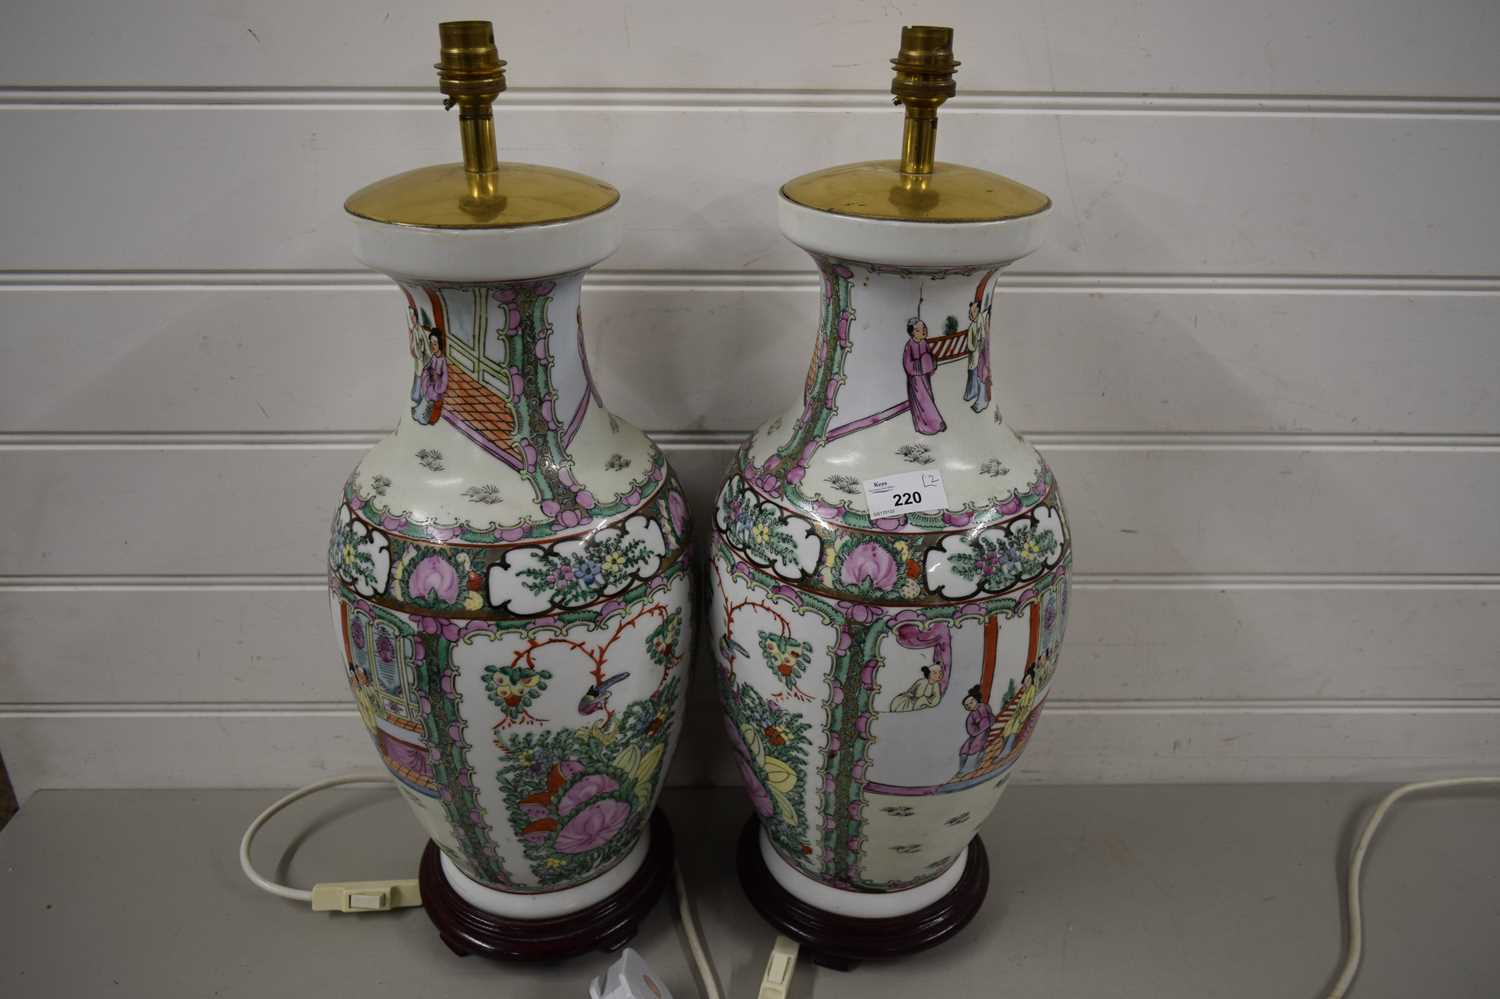 PAIR OF MODERN CHINESE CANTON STYLE TABLE LAMPS